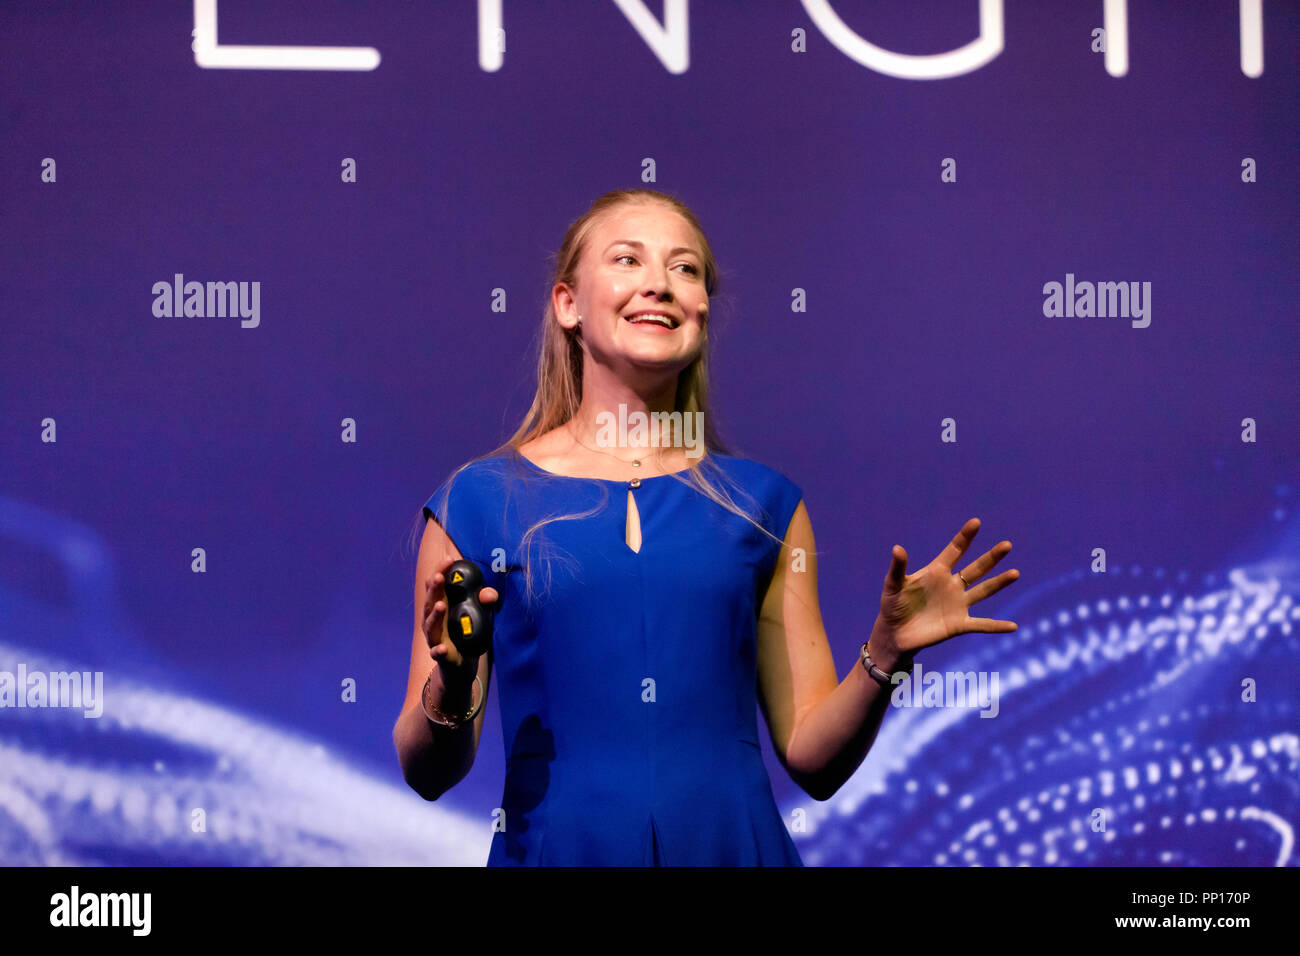 British plasma physicist and science communicator, Melanie Windridge taking about how developments in Nuclear Fusion could soon provide limitless clean energy, on the Engineering Stage, at New Scientist Live Stock Photo